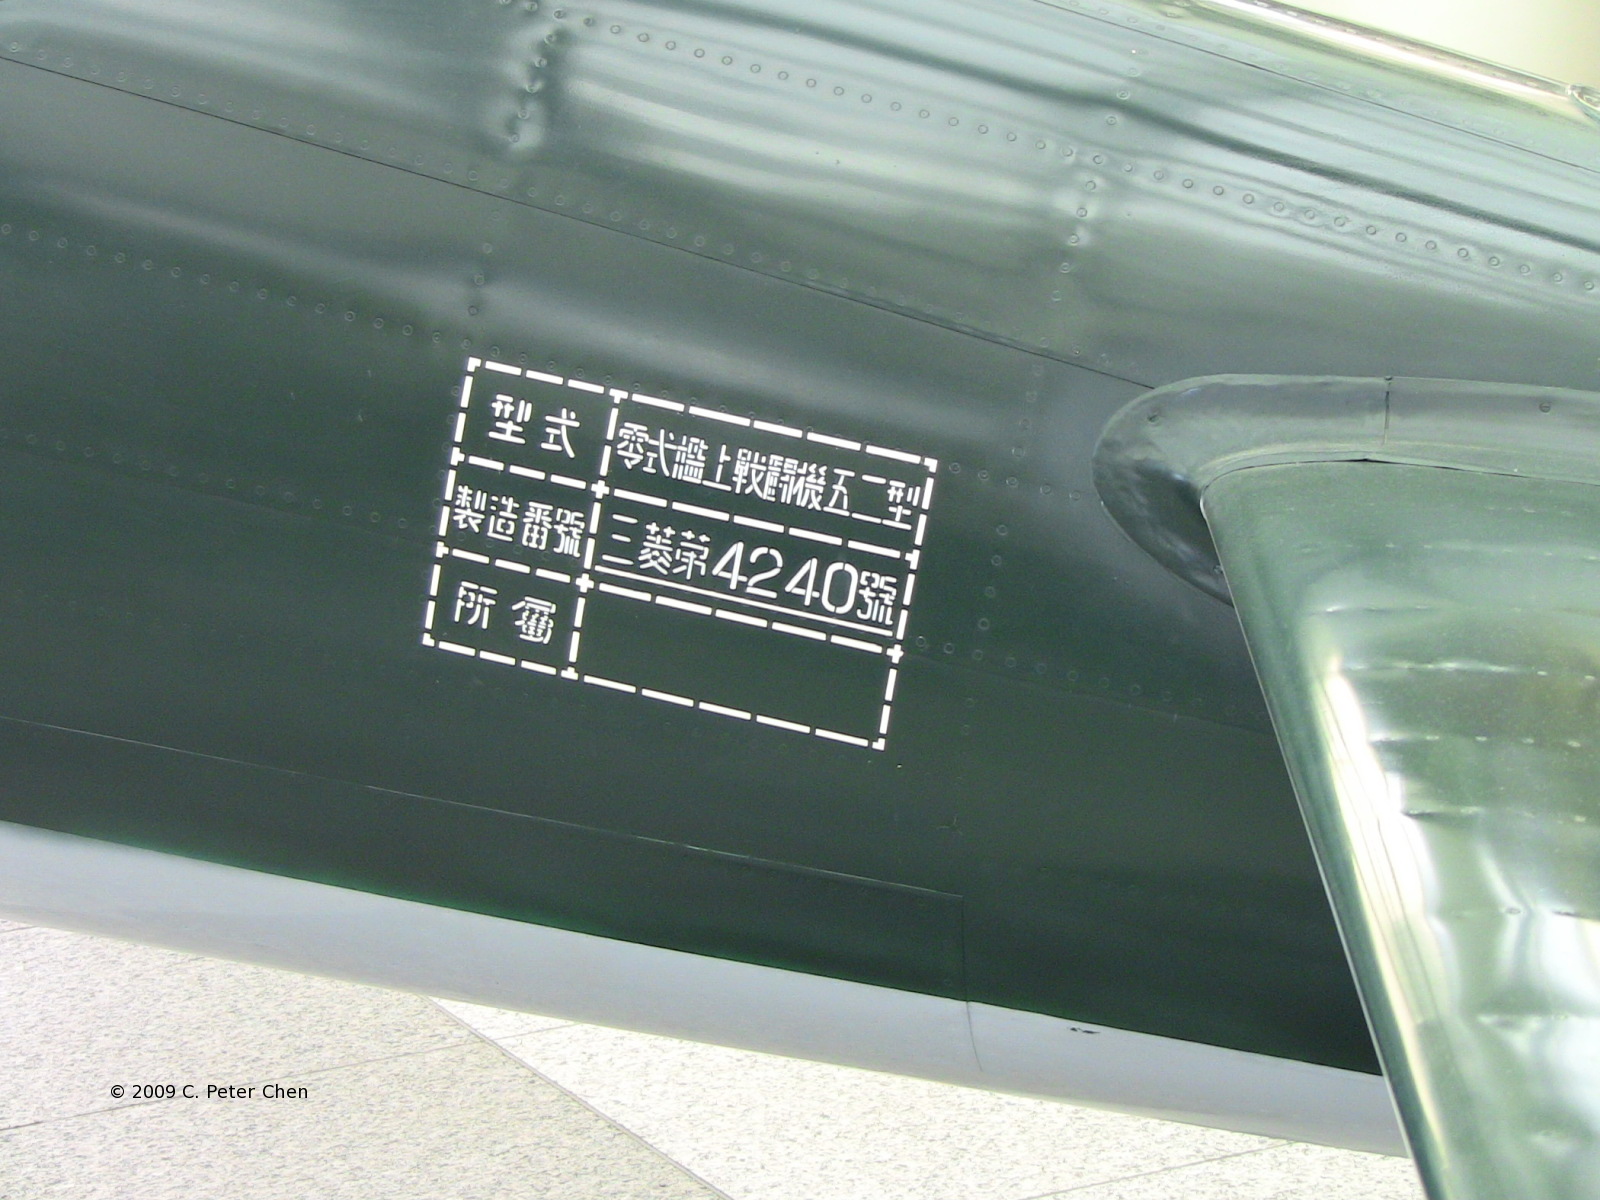 A6M Zero Model 52 fighter on display at the Yushukan Museum, Tokyo, Japan, 7 Sep 2009, photo 4 of 5